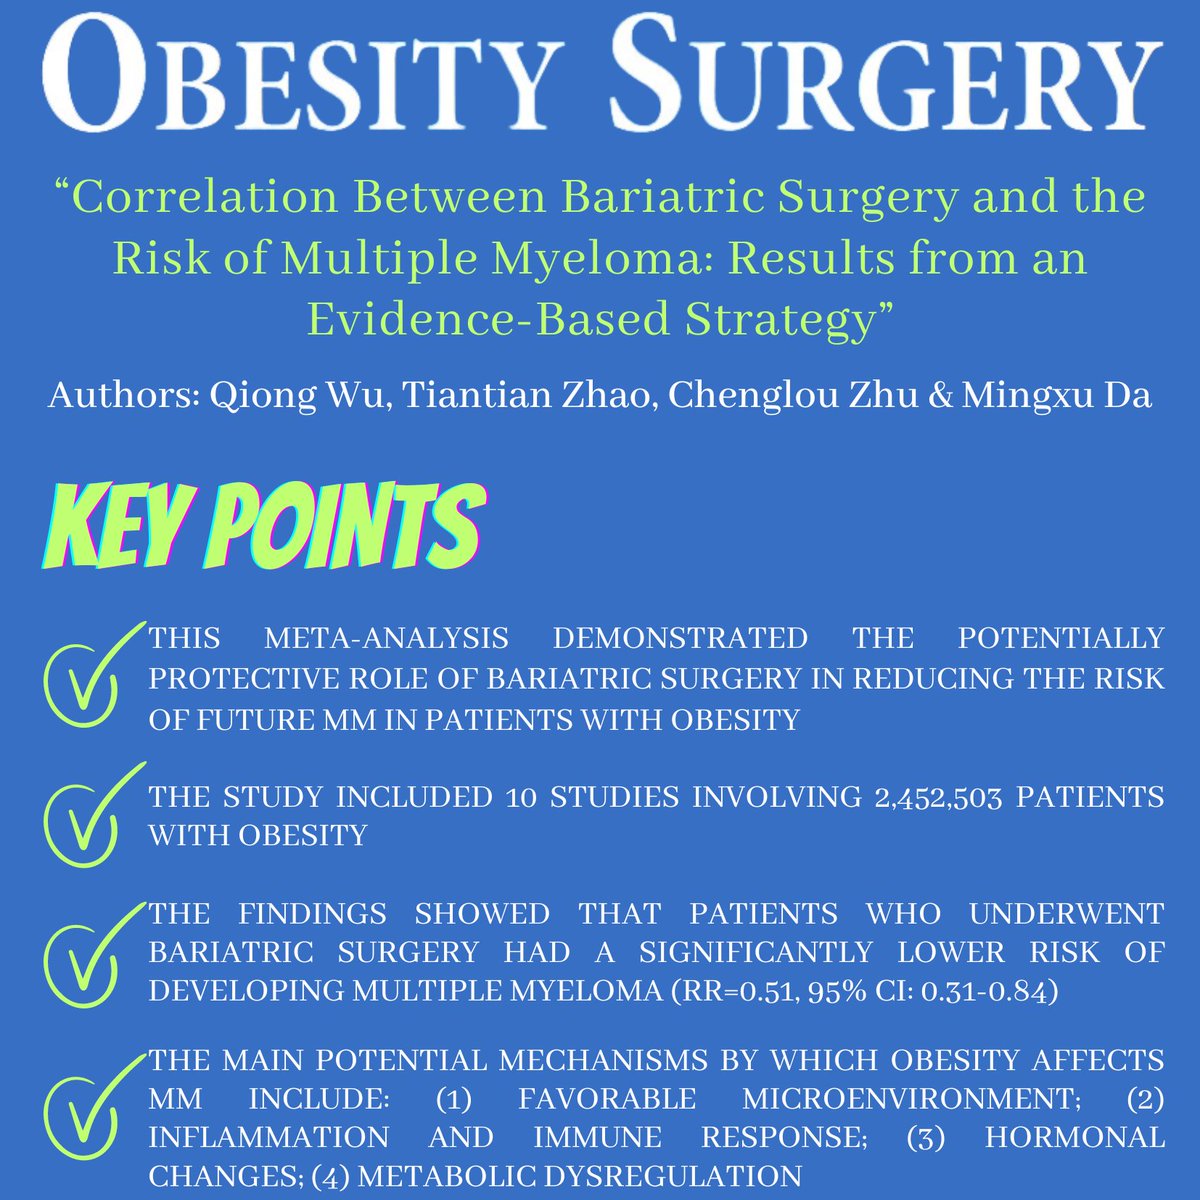 BEST PAPERS MARCH ISSUE: 'Correlation Between Bariatric Surgery and the Risk of Multiple Myeloma: Results from an Evidence-Based Strategy' DOI: doi.org/10.1007/s11695… FREE ARTICLE: rdcu.be/dCLRn